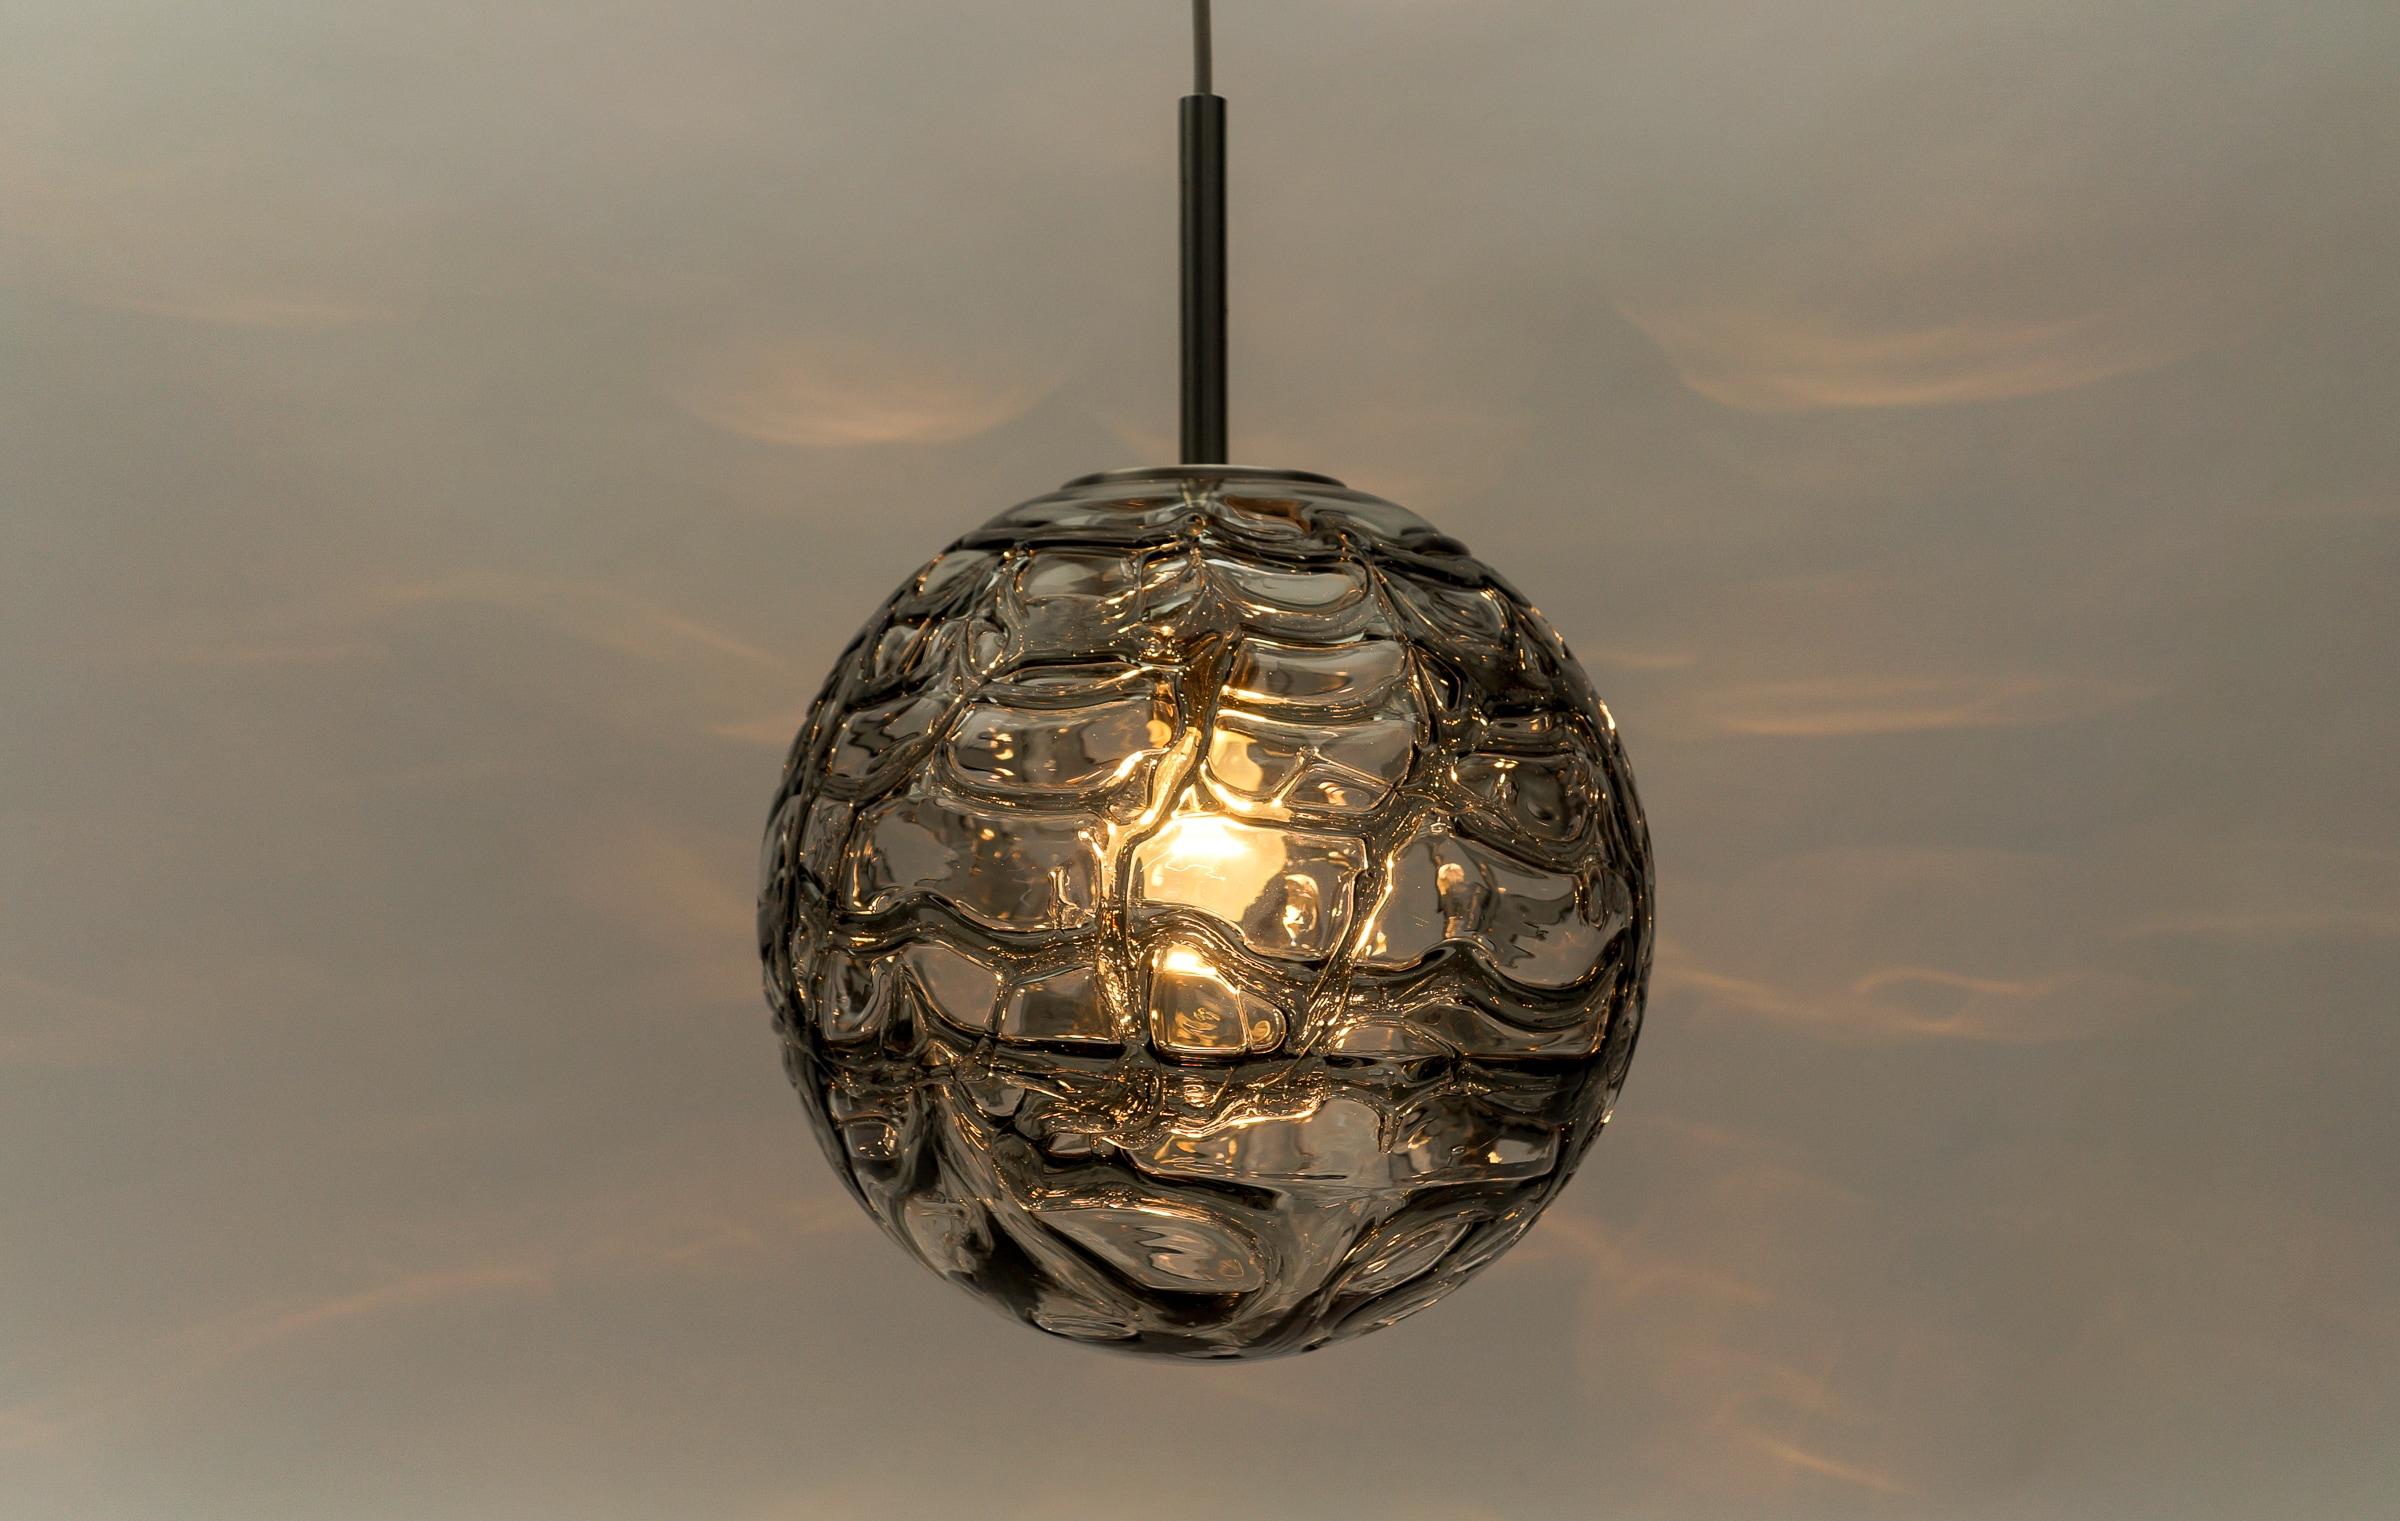 Mid-20th Century Lovely Black Murano Glass Ball Pendant Lamp by Doria, - 1960s Germany For Sale